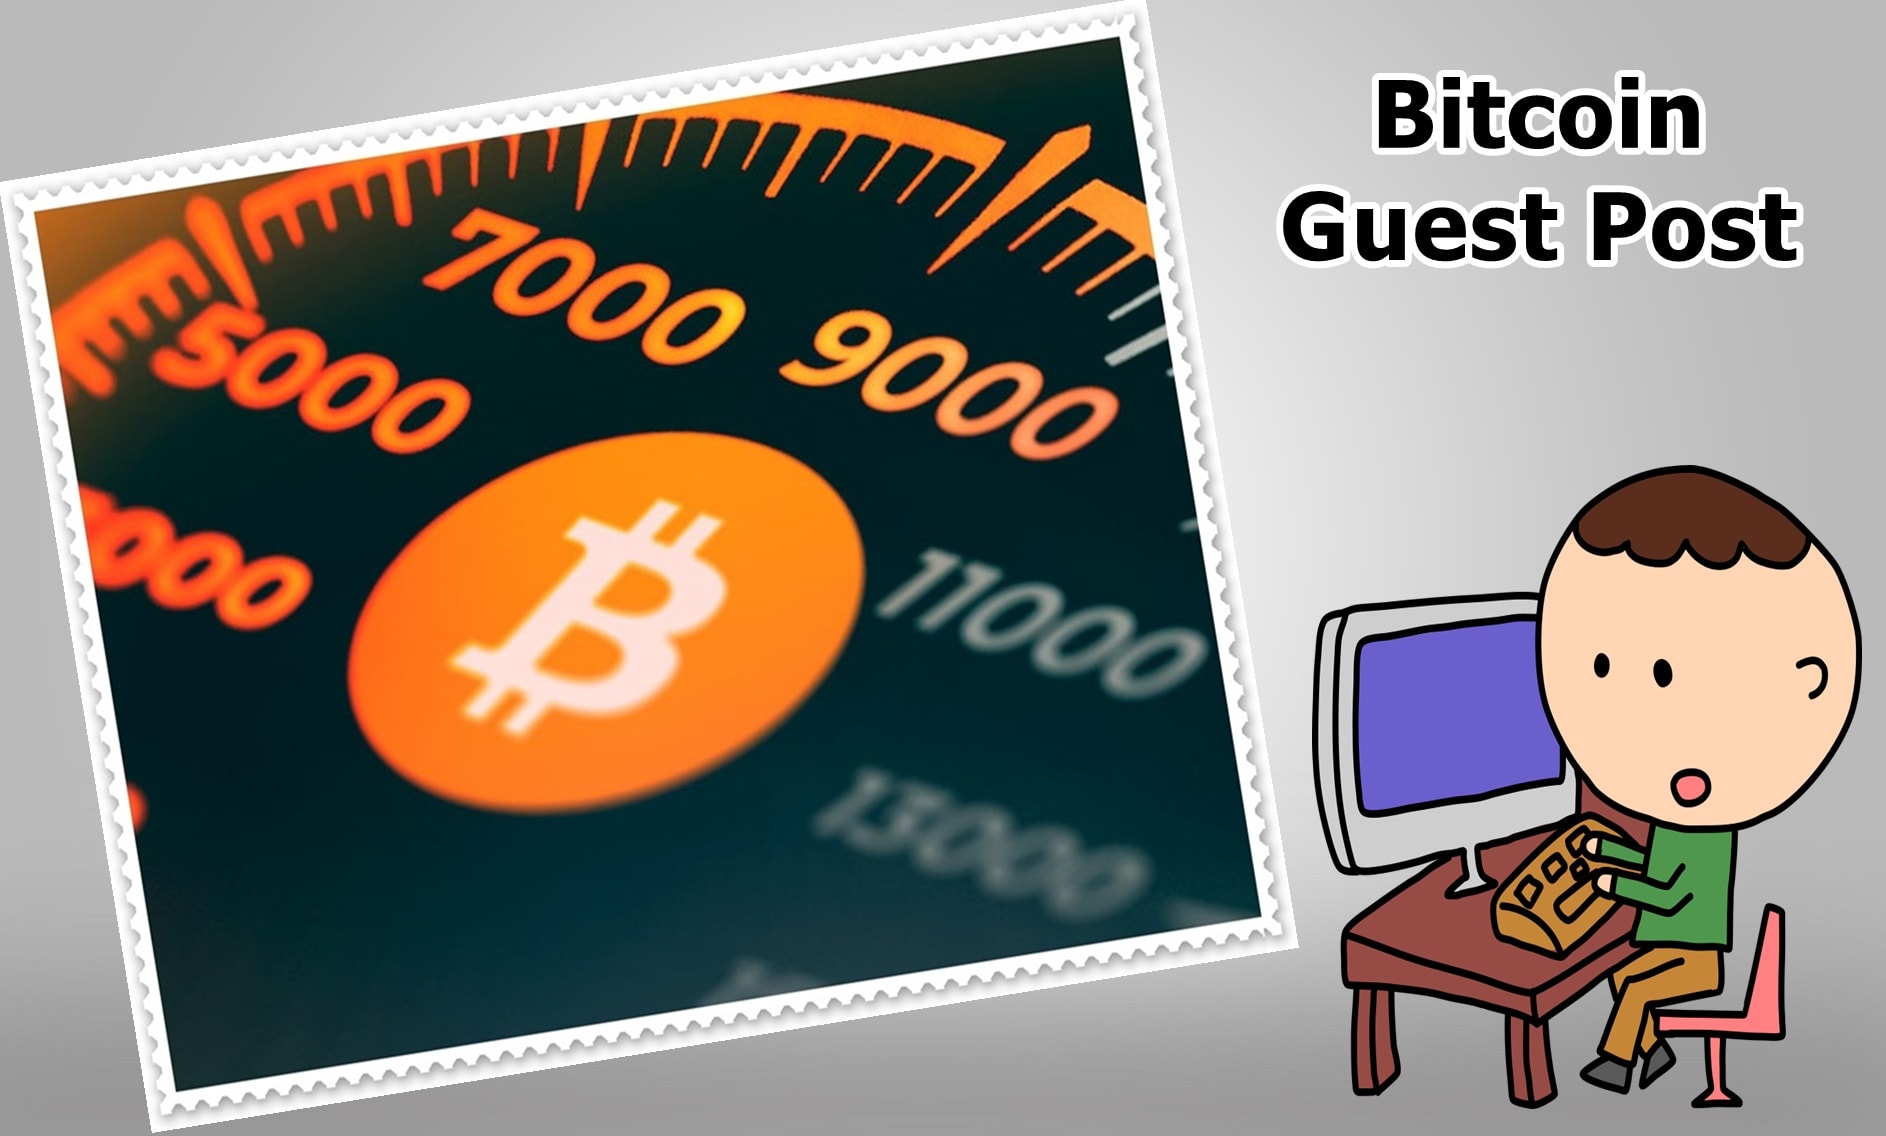 Bitcoin Guest Post | Crypto Write For Us | Blockchain Submit Guest Post